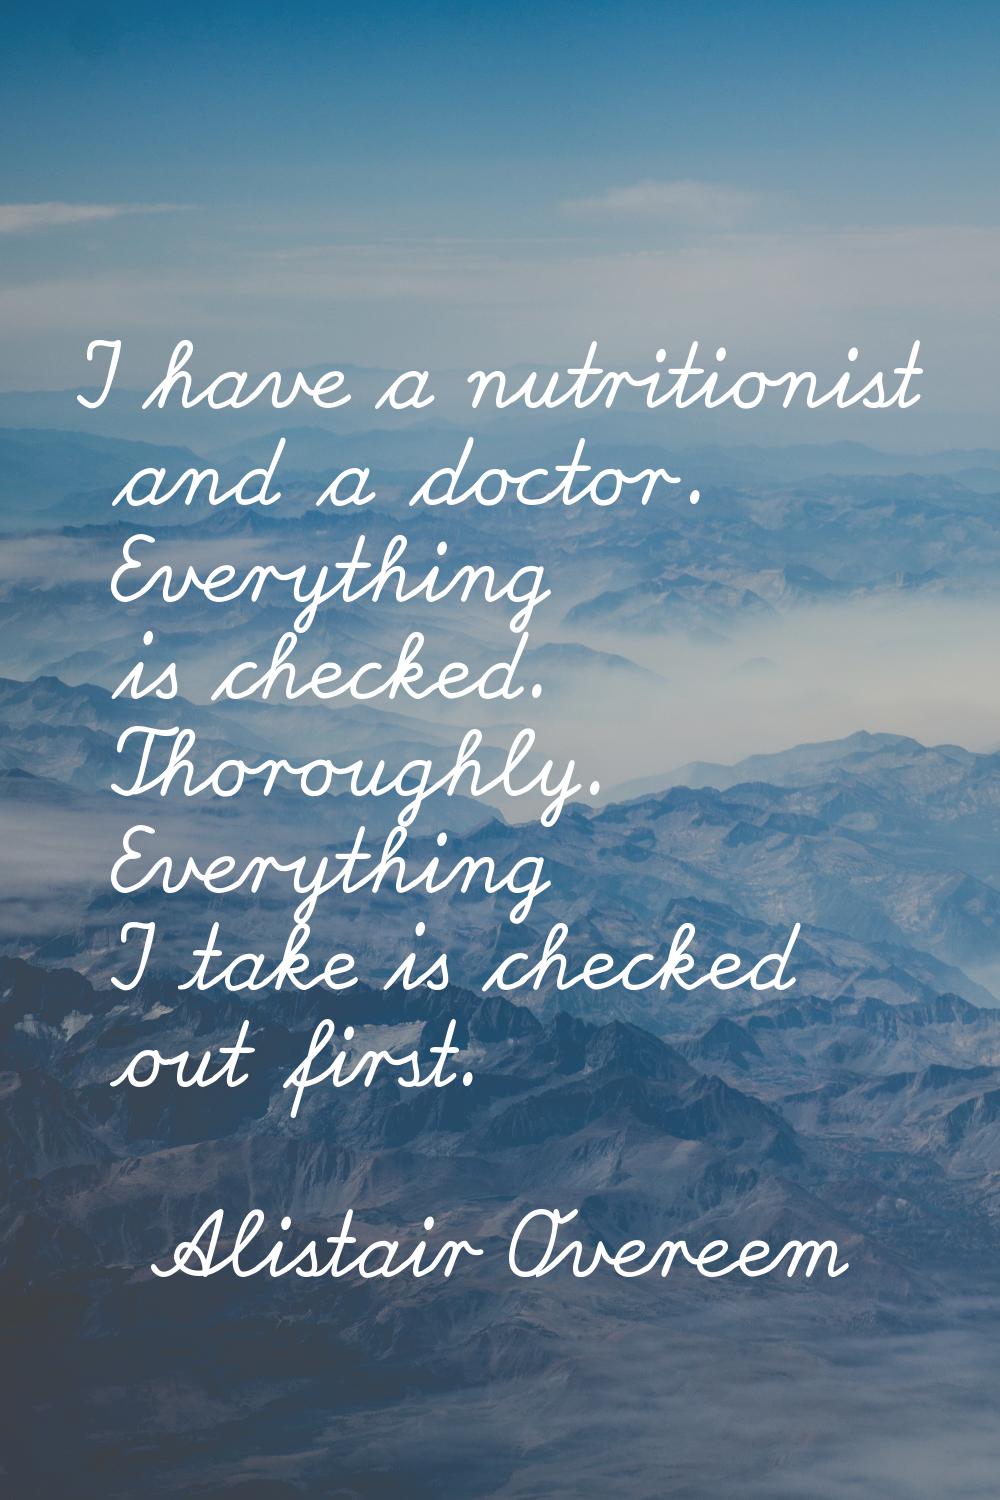 I have a nutritionist and a doctor. Everything is checked. Thoroughly. Everything I take is checked